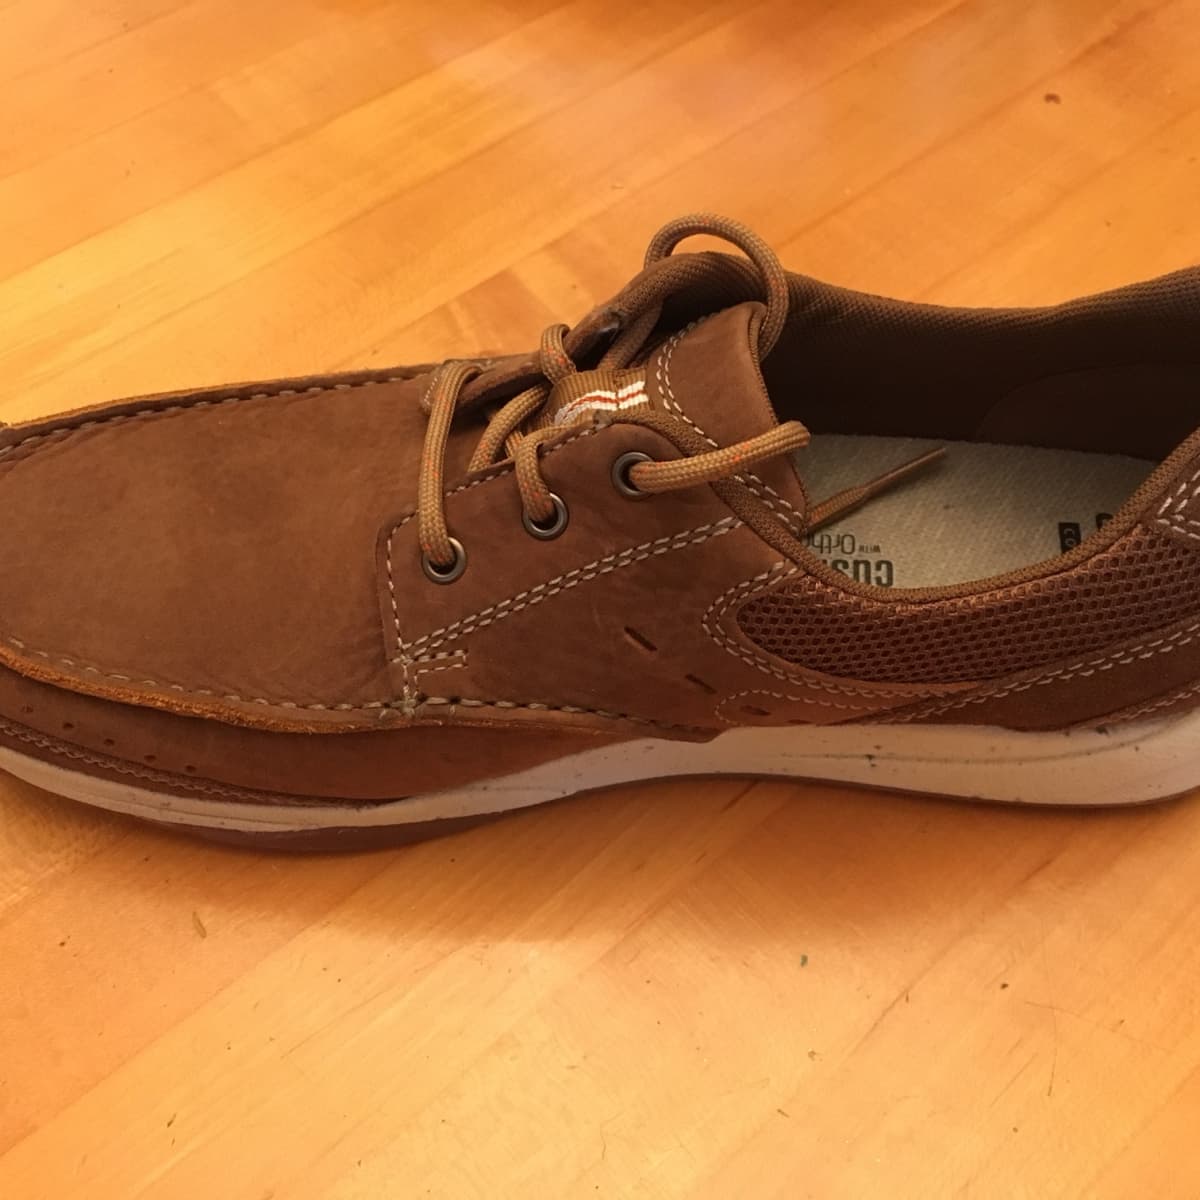 Review of Clarks Shoes: Most Comfortable Footwear - Bellatory